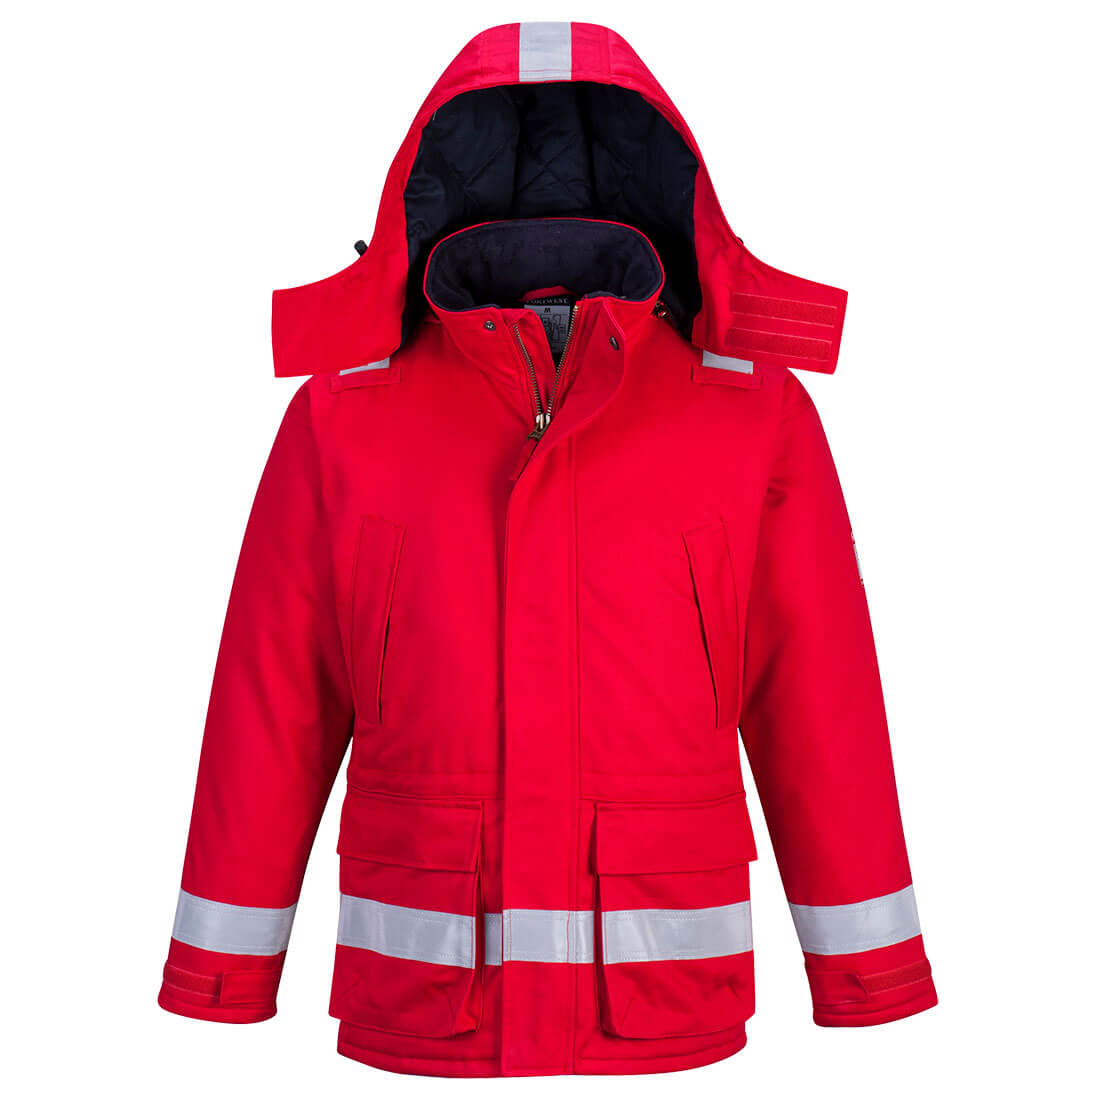 Image of Biz Flame Mens Flame Resistant Antistatic Winter Jacket Red 2XL